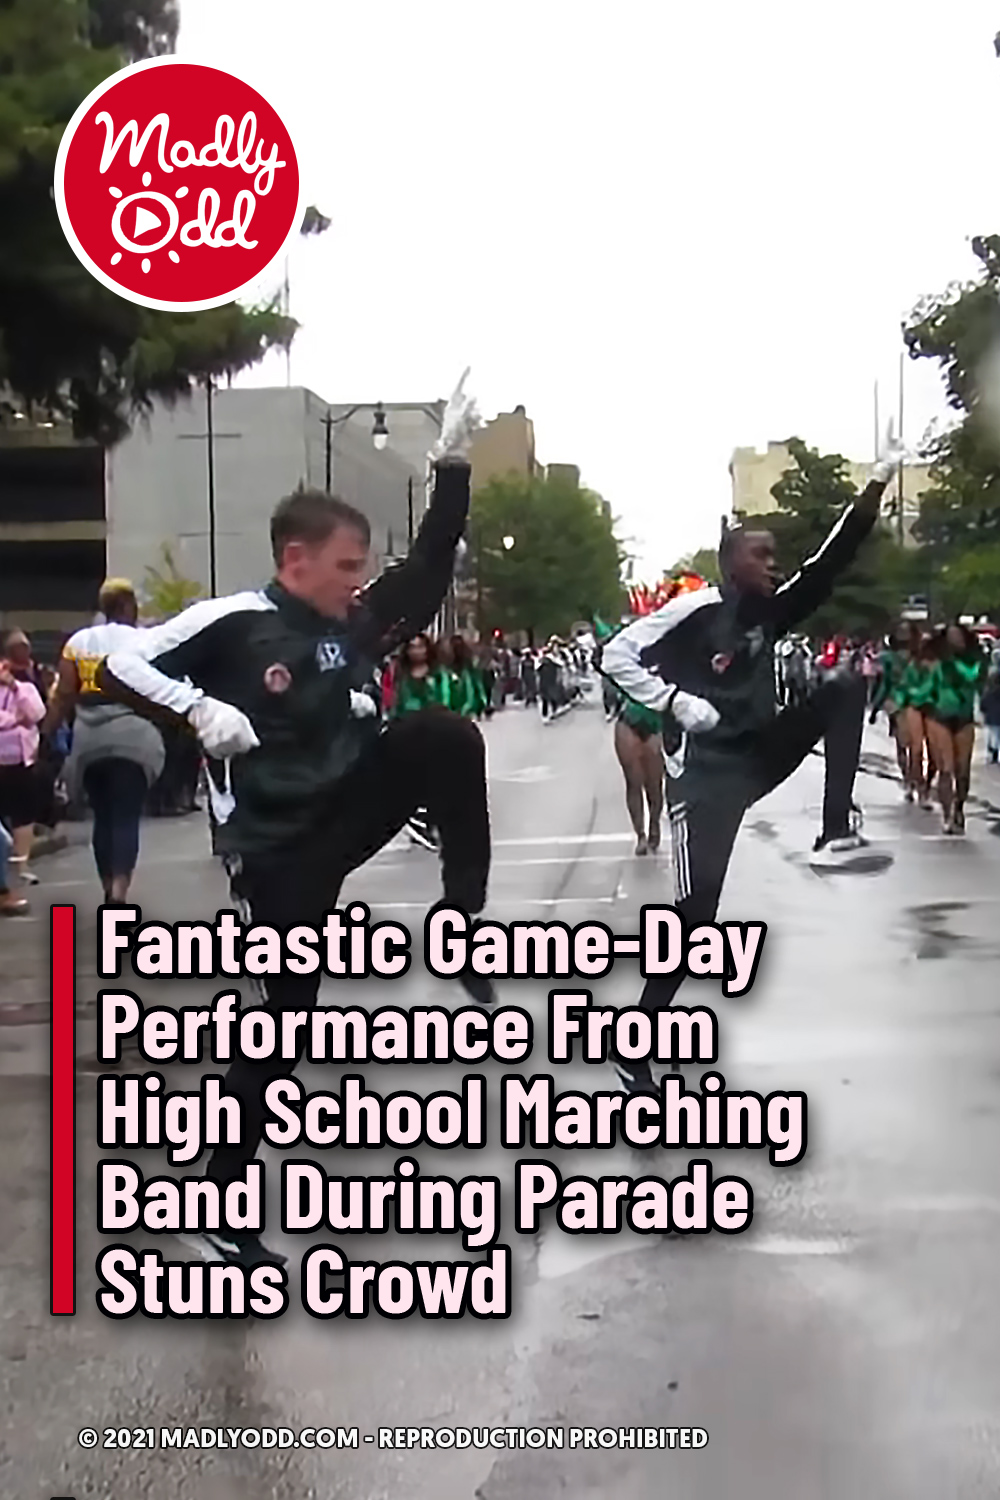 Fantastic Game-Day Performance From High School Marching Band During Parade Stuns Crowd